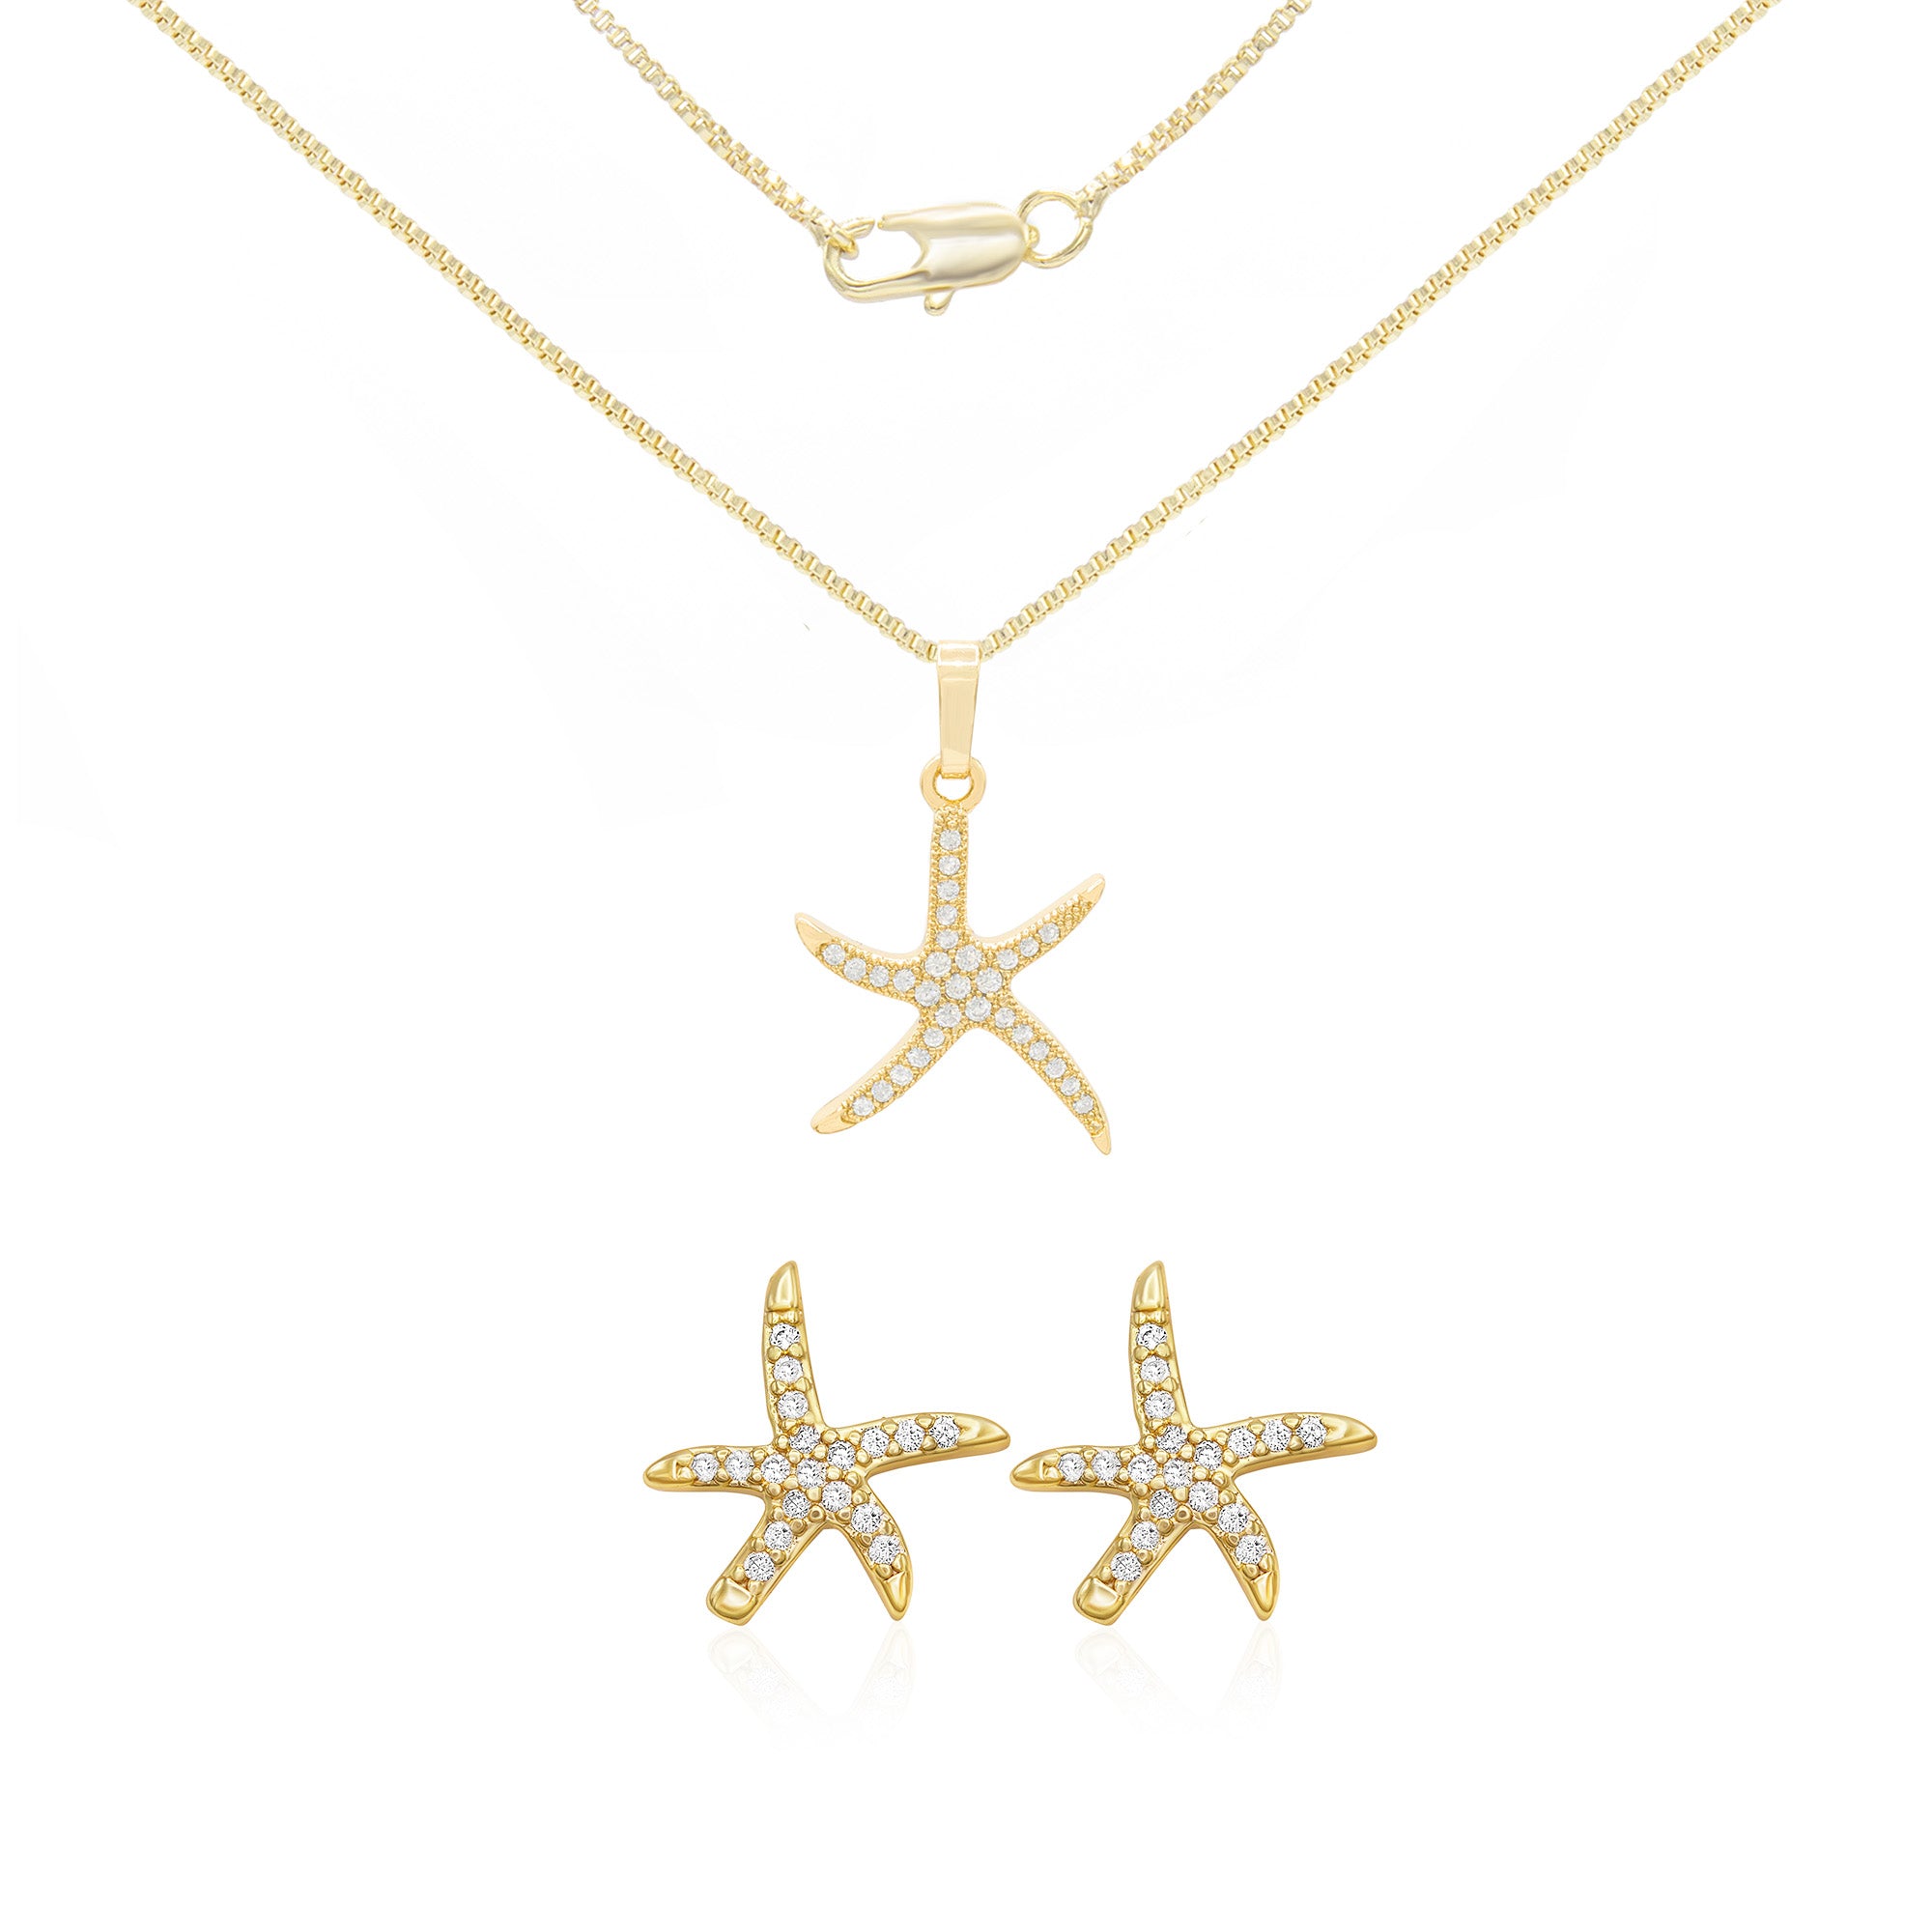 Cubic Zirconia Starfish Pendant 14K Gold Filled Box Necklace Stud Earrings Jewelry Set 